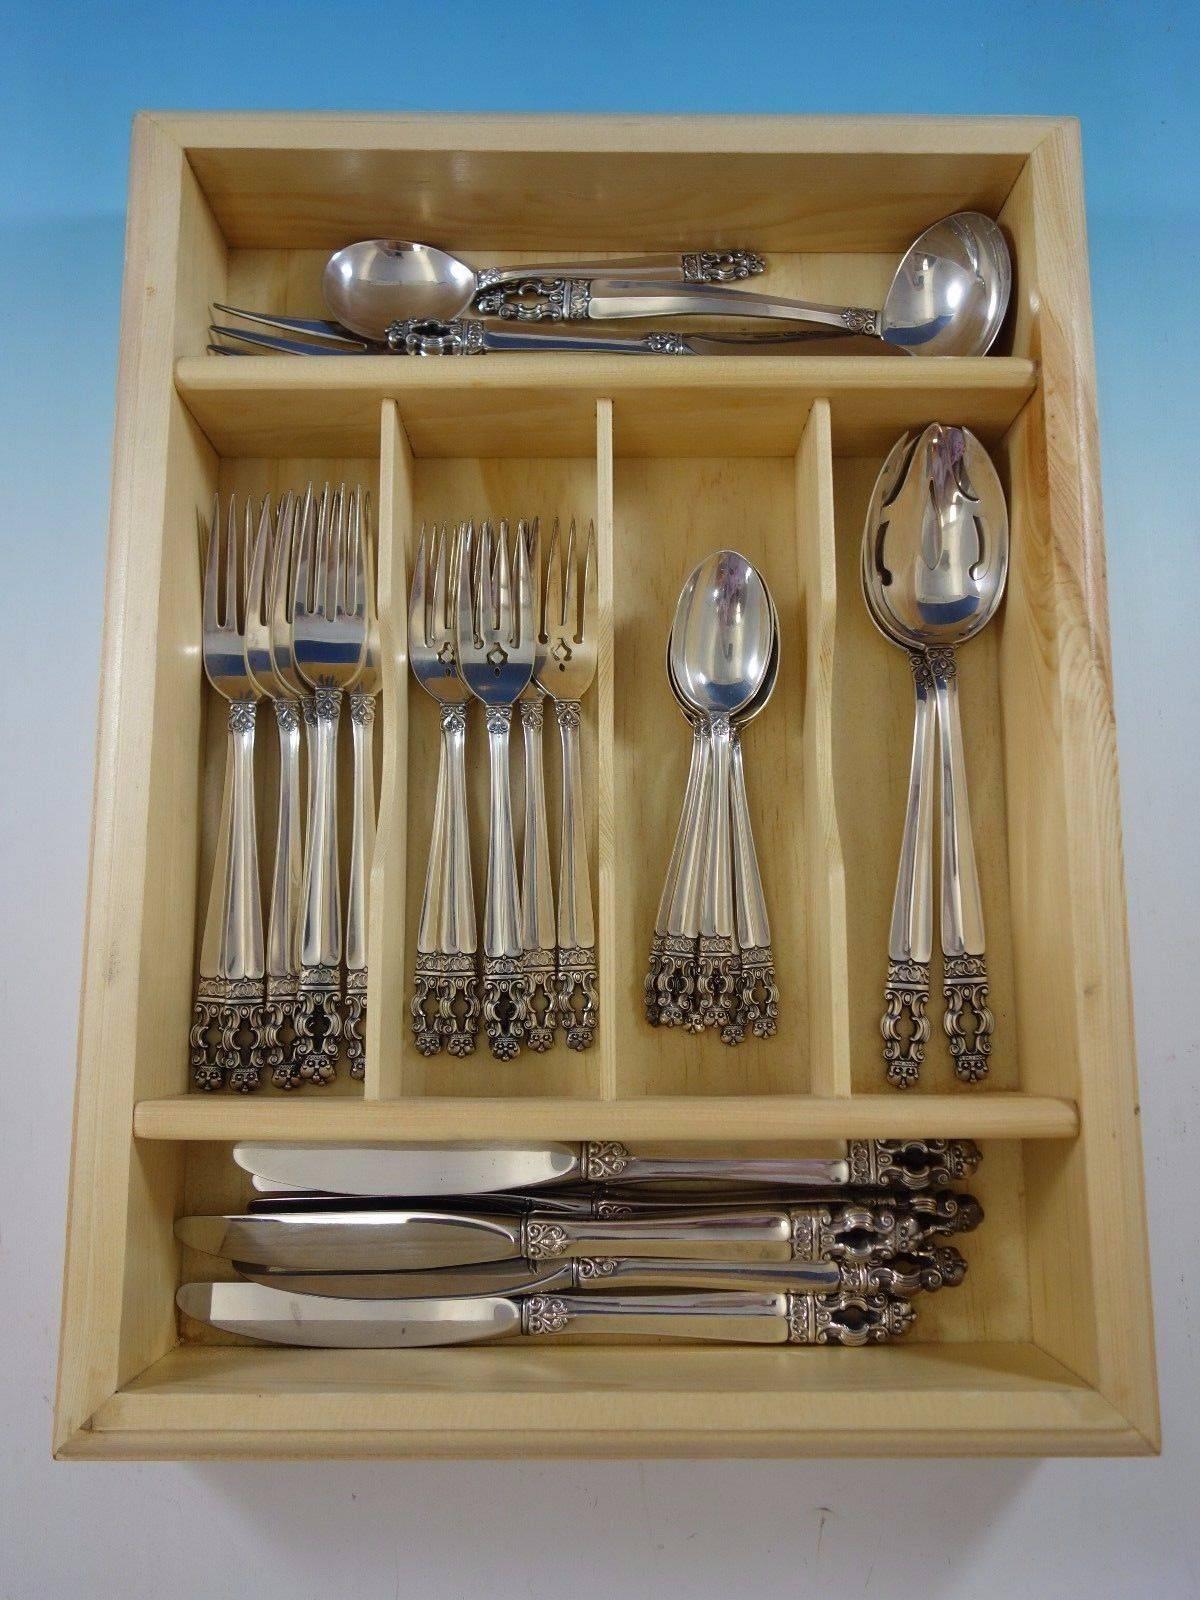 Sovereign Hispana by Gorham sterling silver flatware set, 30 pieces. Great starter set! This set includes: 

Six knives, 9